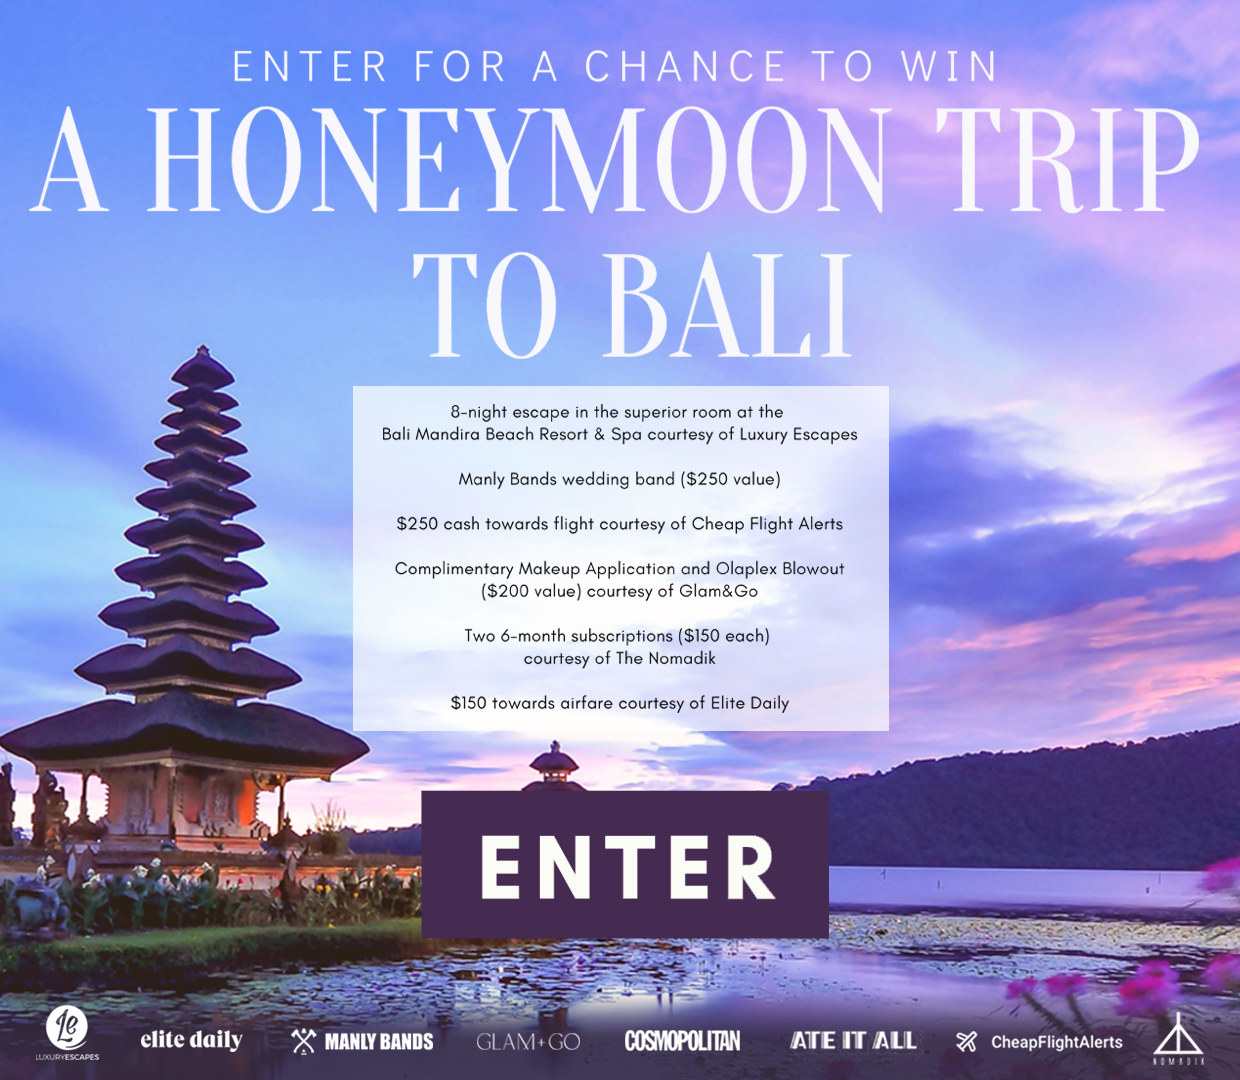 Enter for a chance to win a 8-night escape in the superior room at the Mandira Beach Resort & Spa Bali courtesy of Luxury Escapes, Manly Bands wedding band ($250 value), $250 cash towards flight courtesy of Cheap Flight Alerts, complimentary Makeup Application and Olaplex Blowout (Valued at $200 courtesy of Glam&Go), (2) 6 month Nomadik subscriptions ($150 each), and $150 towards airfare courtesy of Elite Daily.